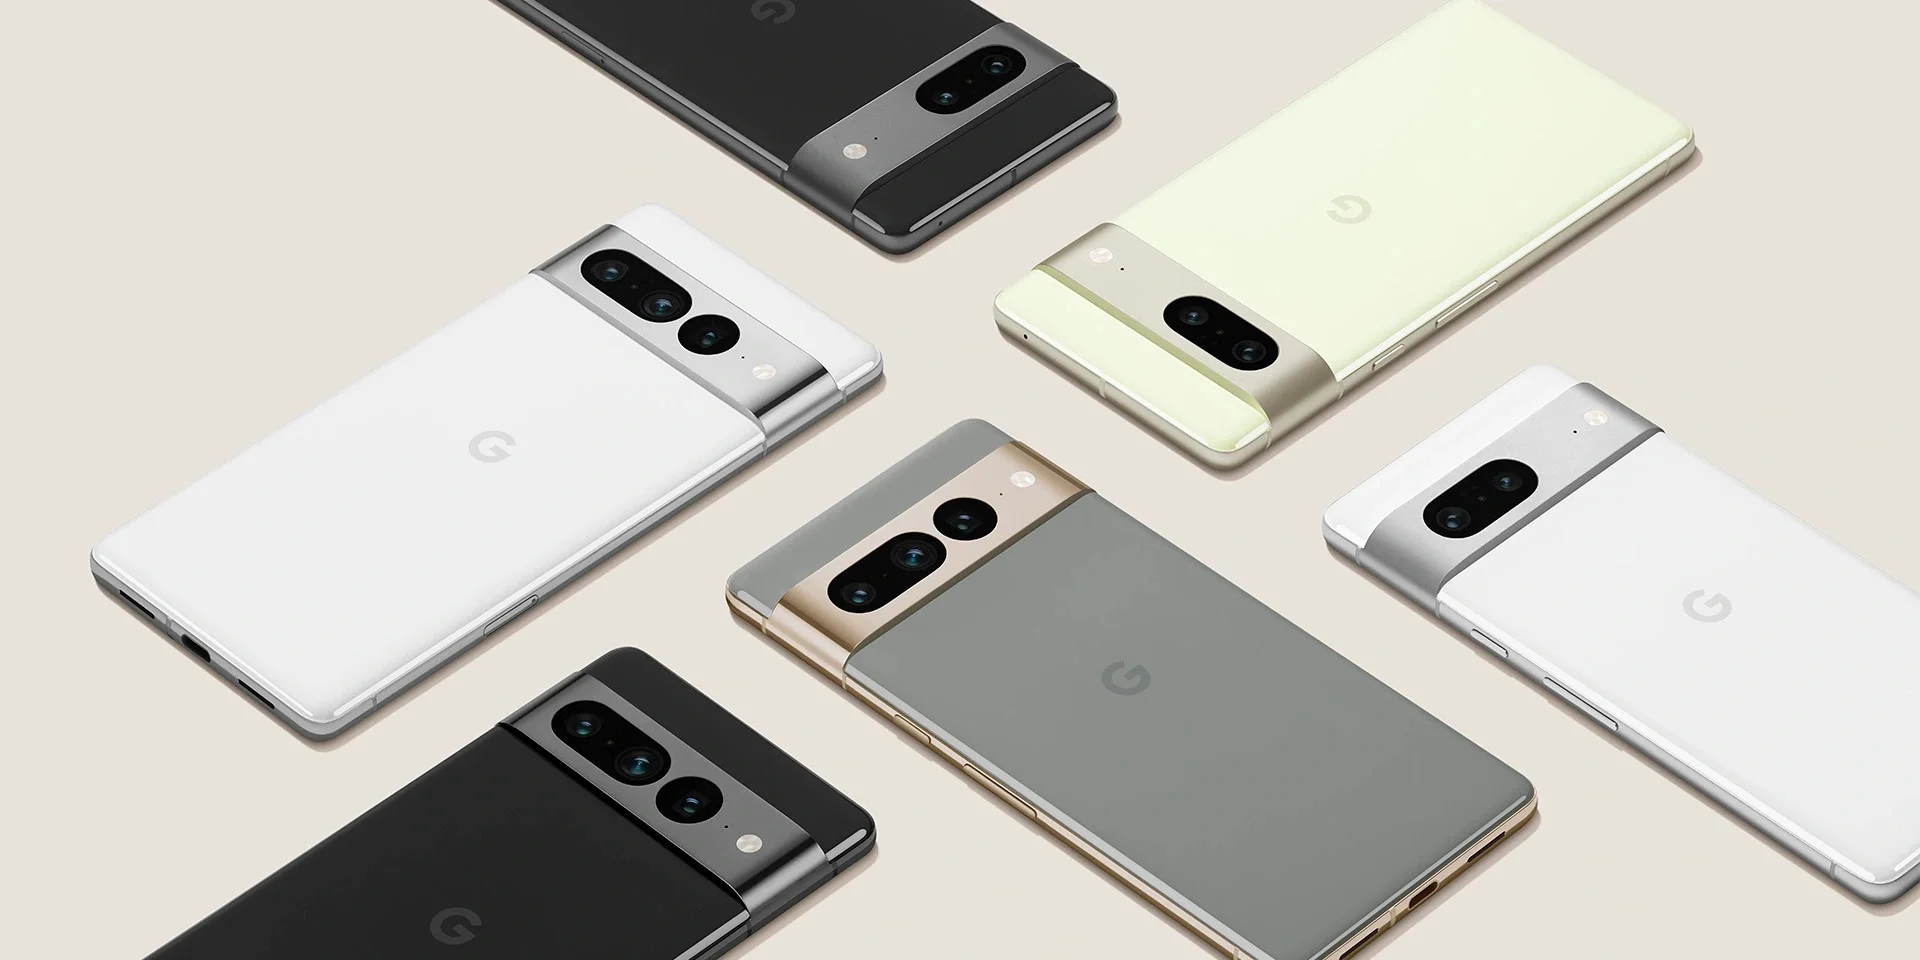 The characteristics of the unreleased Pixel 7 Pro have become known